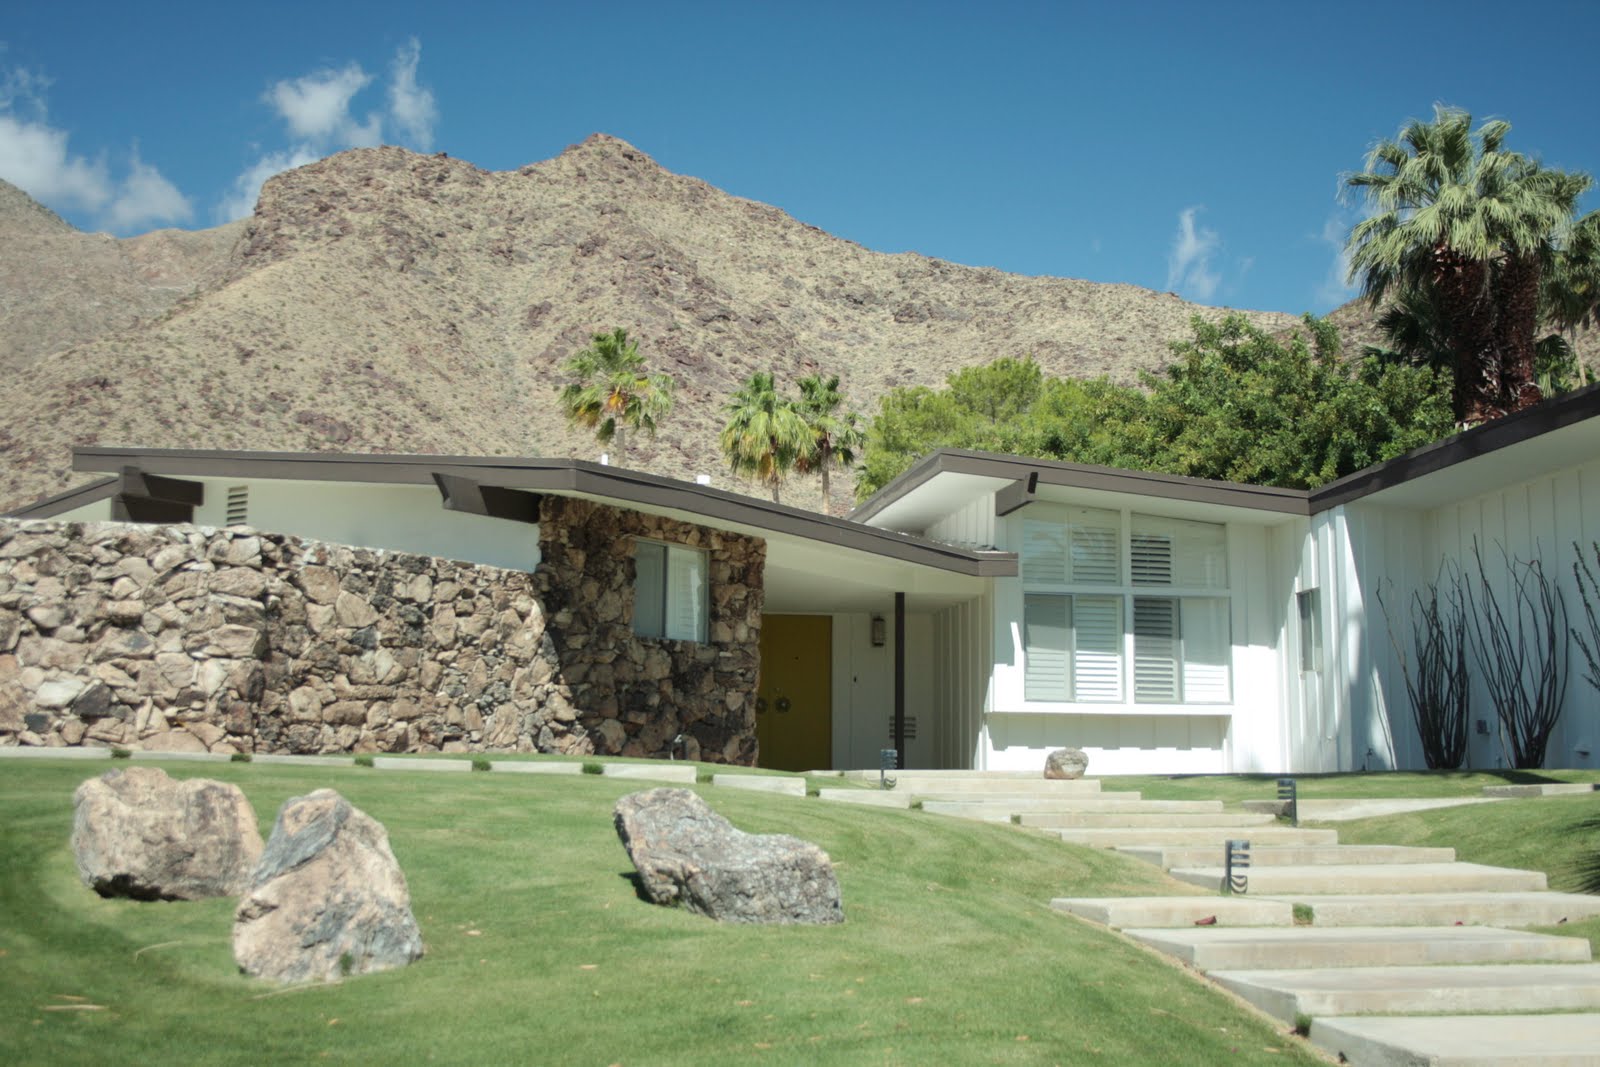 A Day In the Life Of: Mid-century Modern Homes in Palm Springs